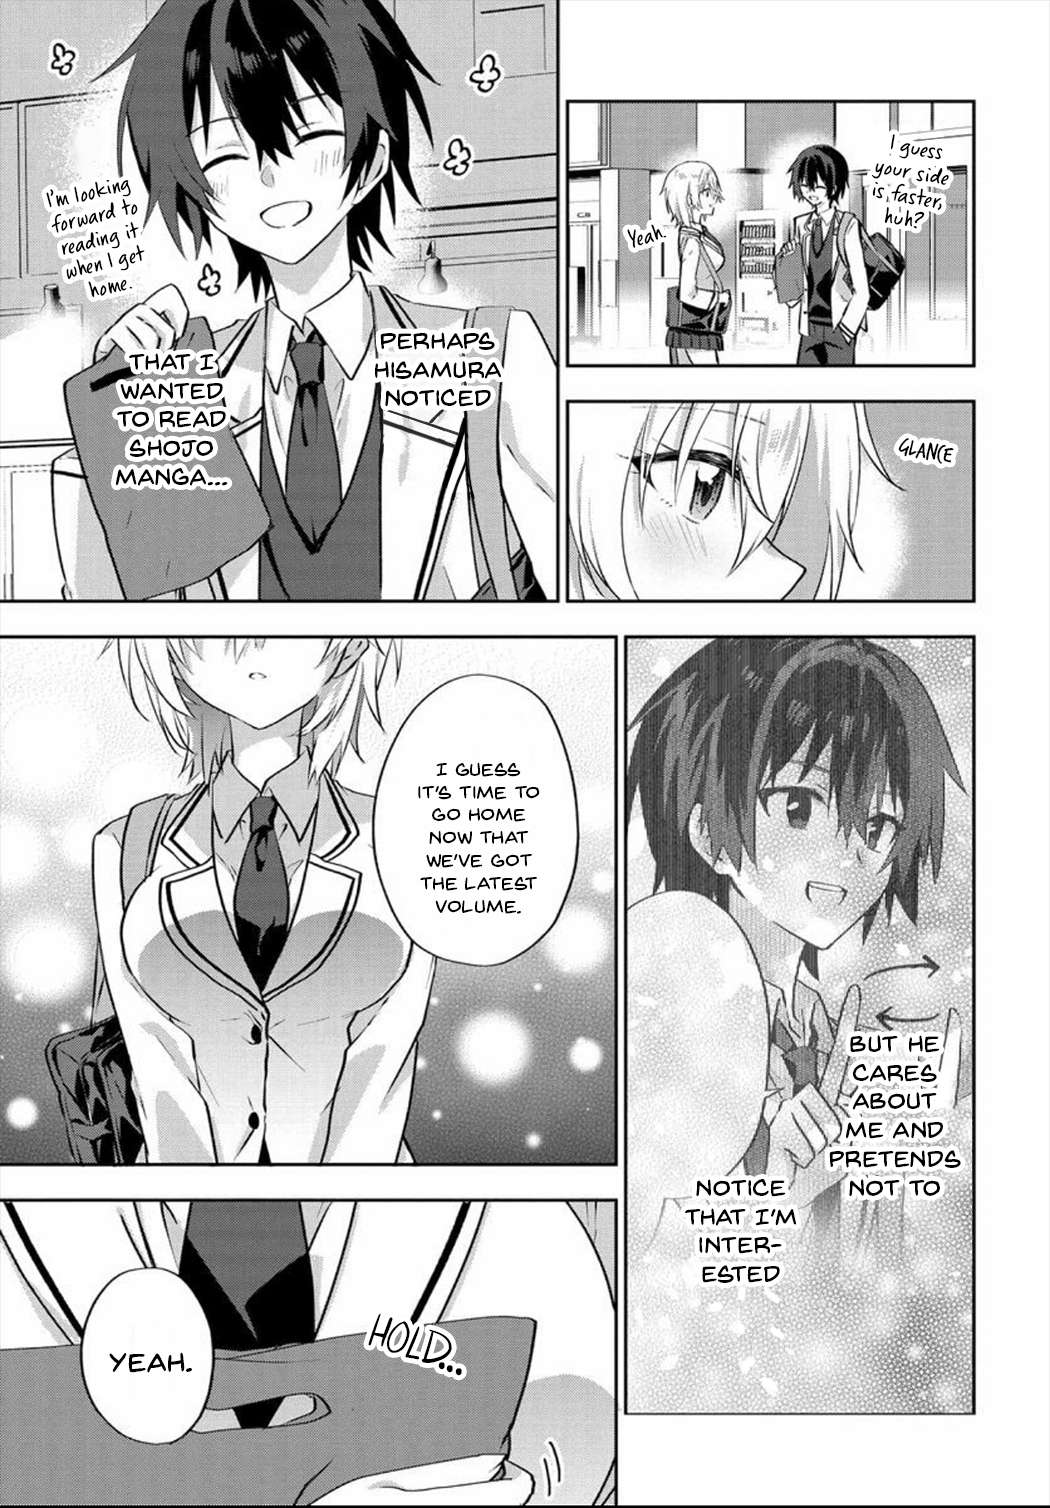 Since I’Ve Entered The World Of Romantic Comedy Manga, I’Ll Do My Best To Make The Losing Heroine Happy - chapter 5.2 - #2